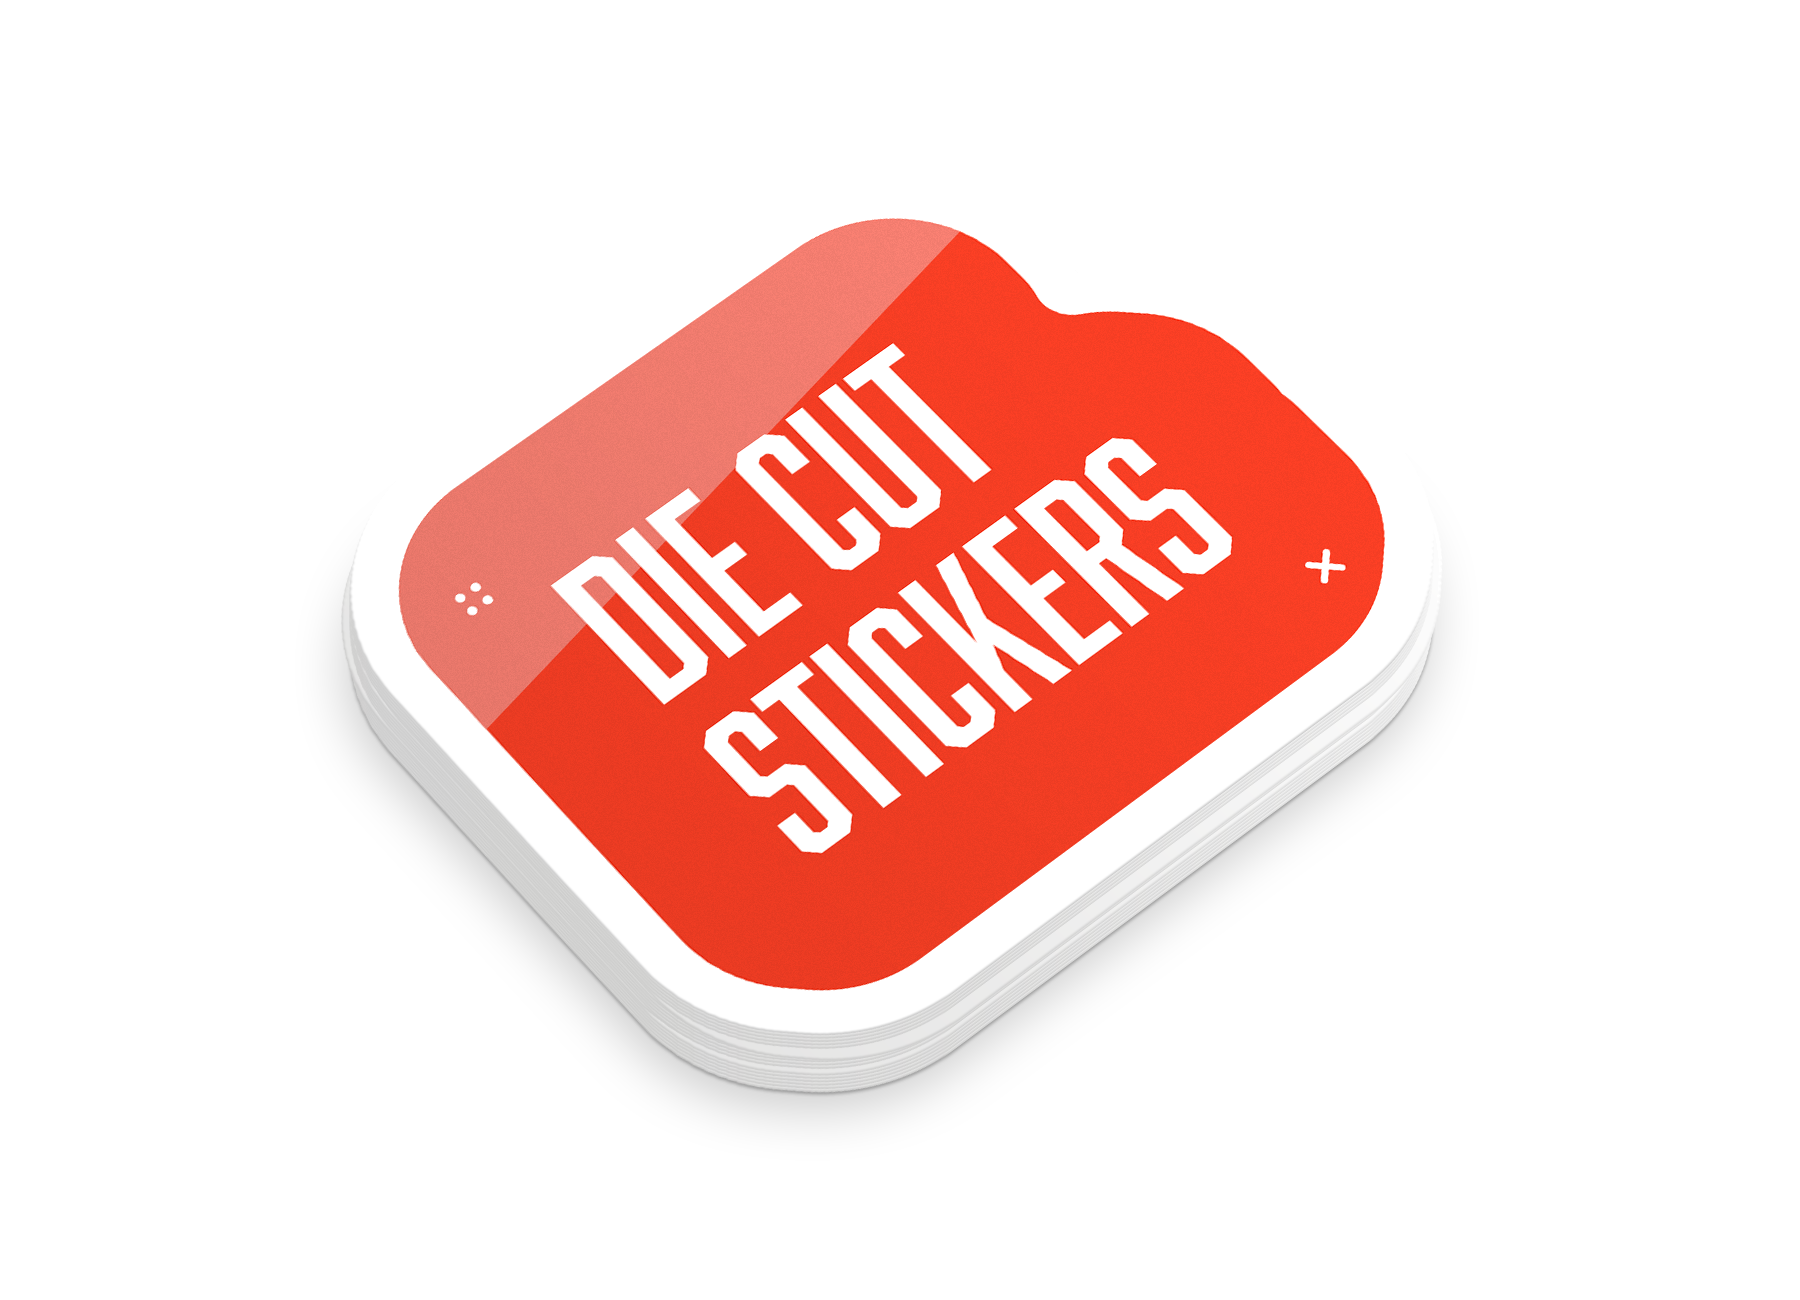 Die-Cut Sticker Printing - Print in Exact Shape and Size